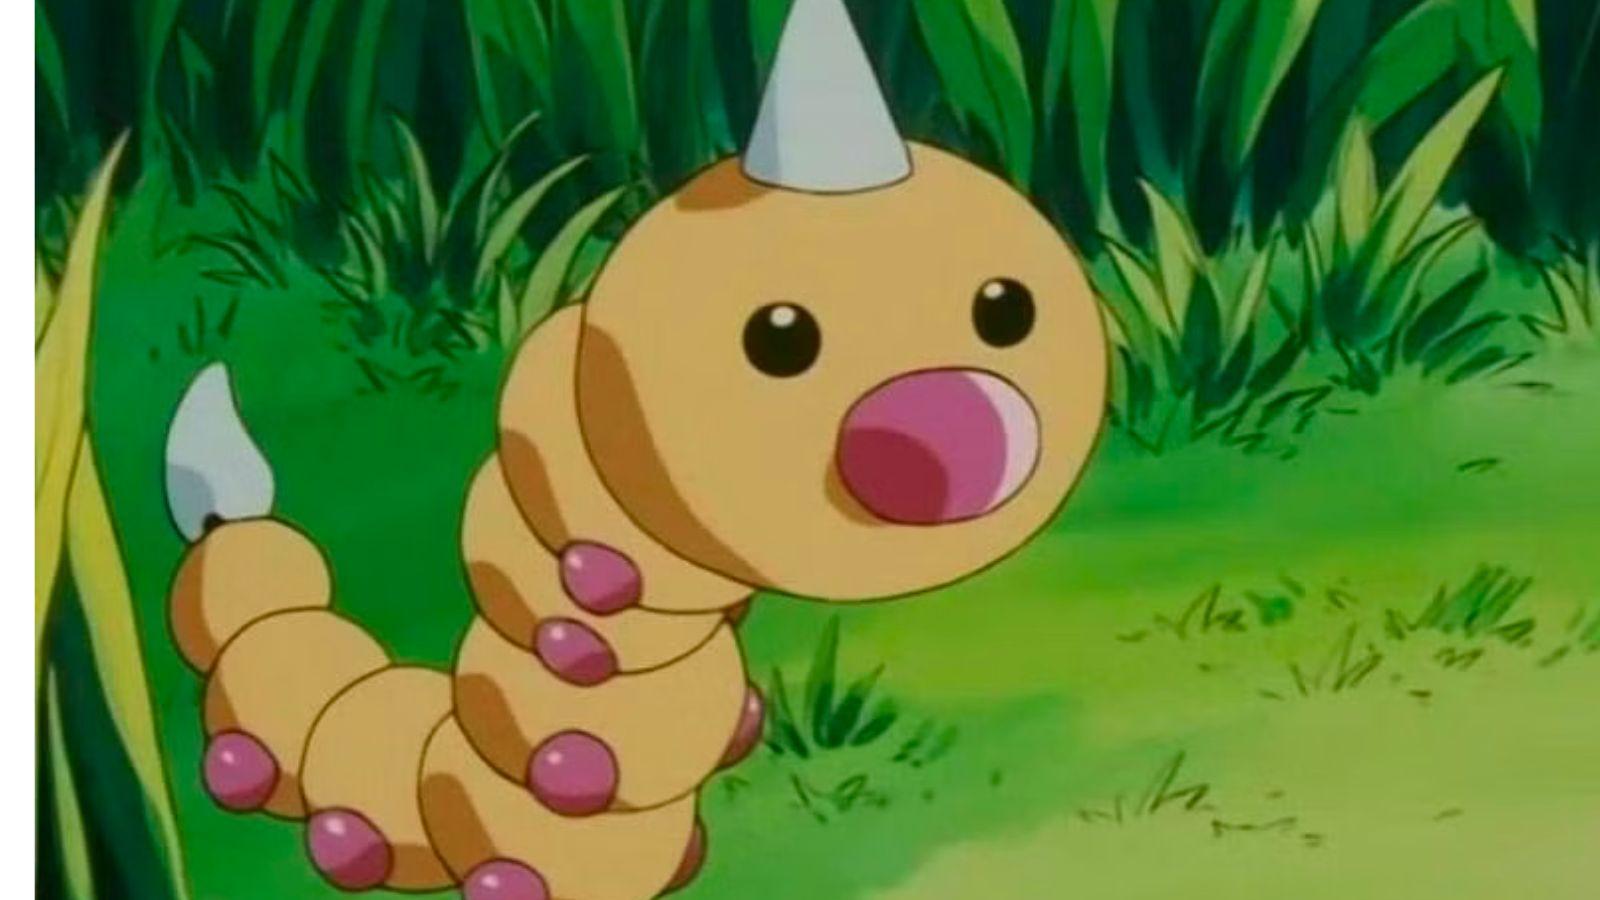 A Weedle in Pokemon anime